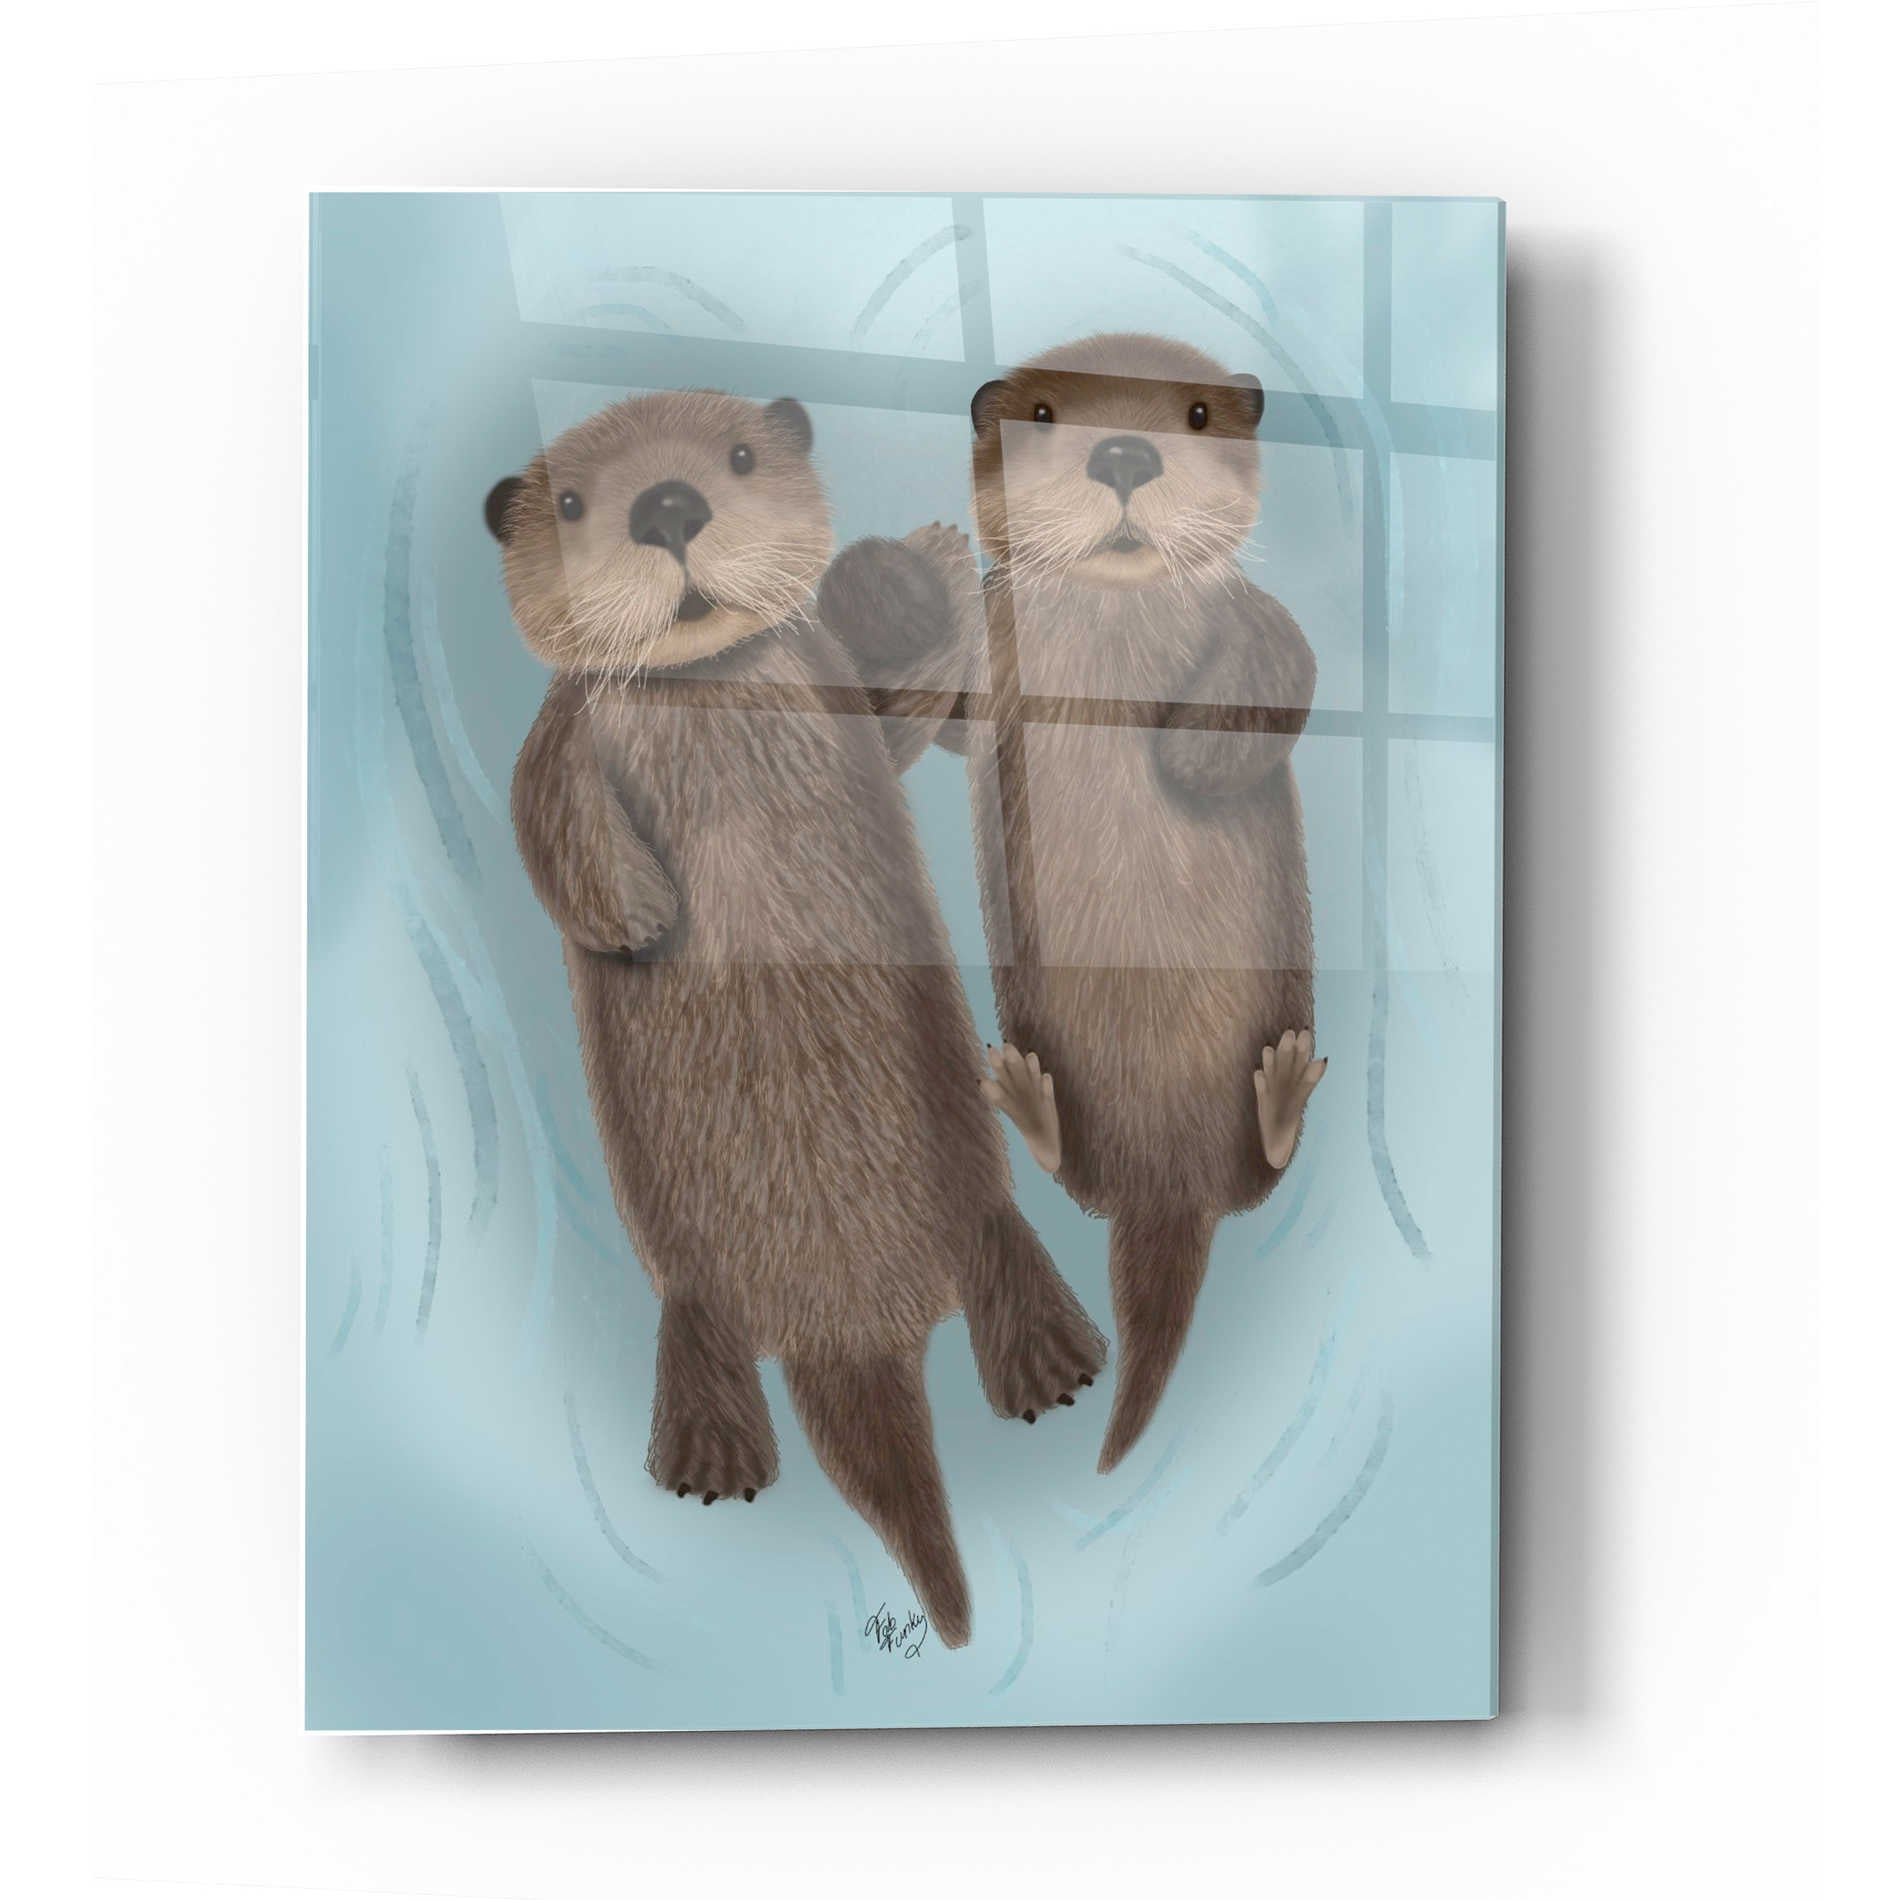 Epic Art 'Otters Holding Hands' by Fab Funky Acrylic Glass Wall Art,12x16